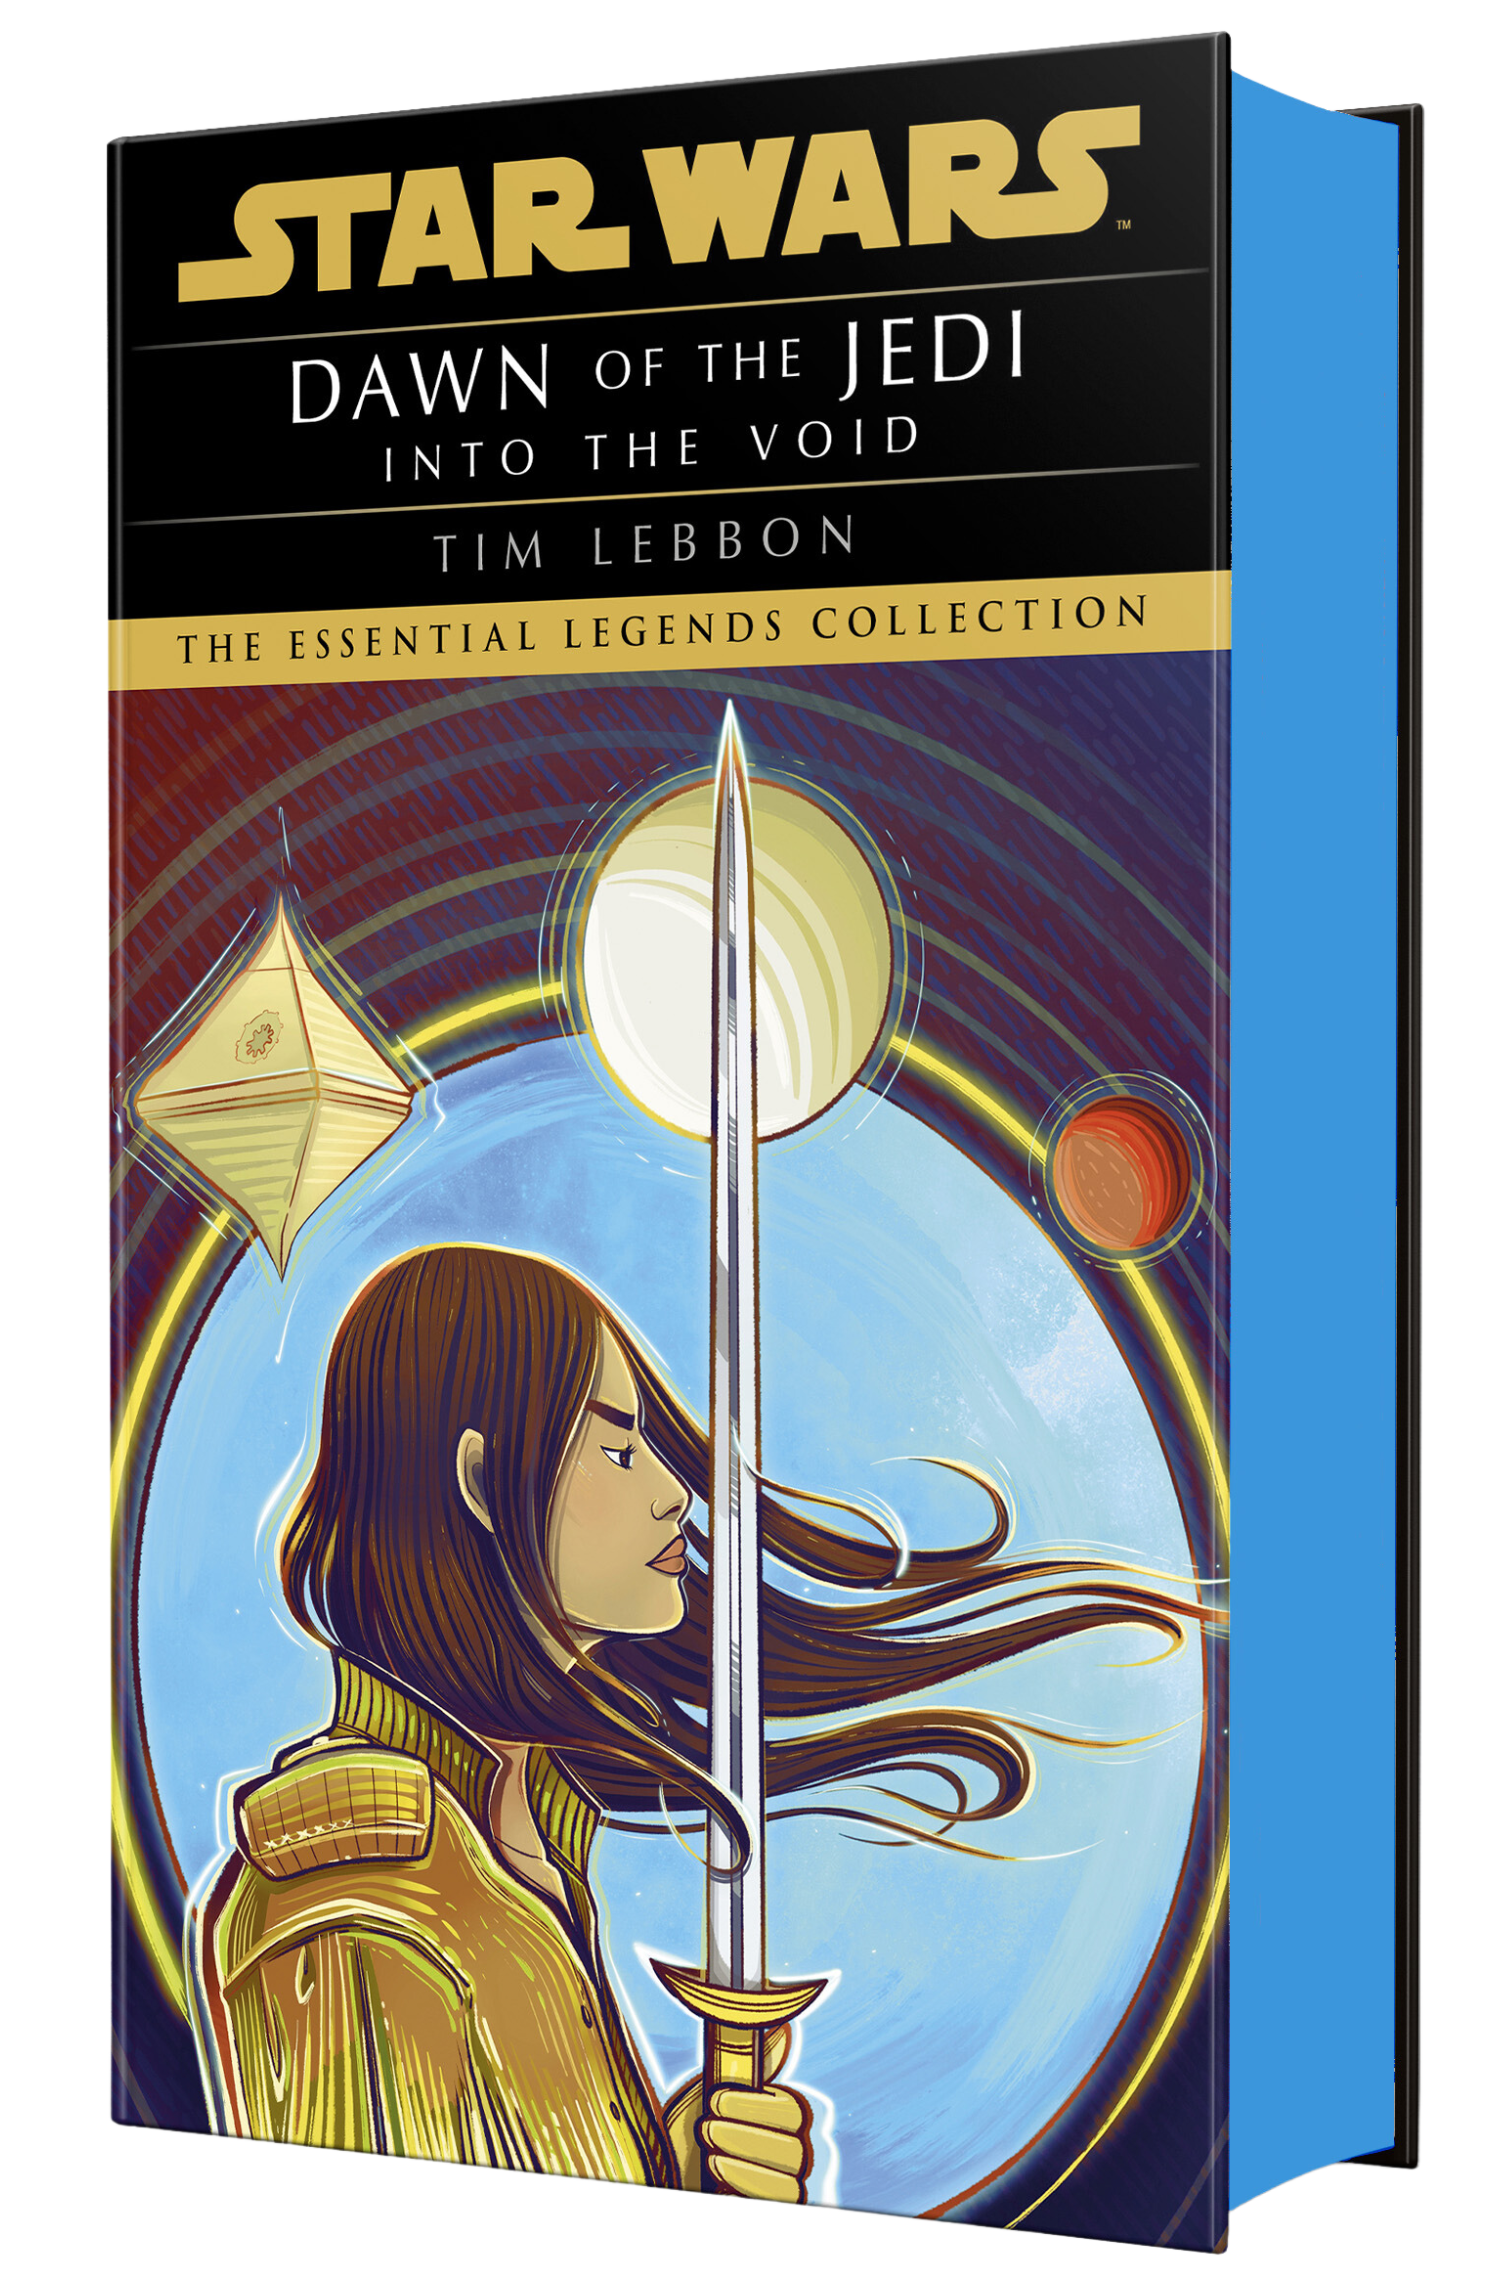 Star Wars: Dawn of the Jedi - Into the Void by Tim Lebbon - Limited Edition  - Inkstone Books